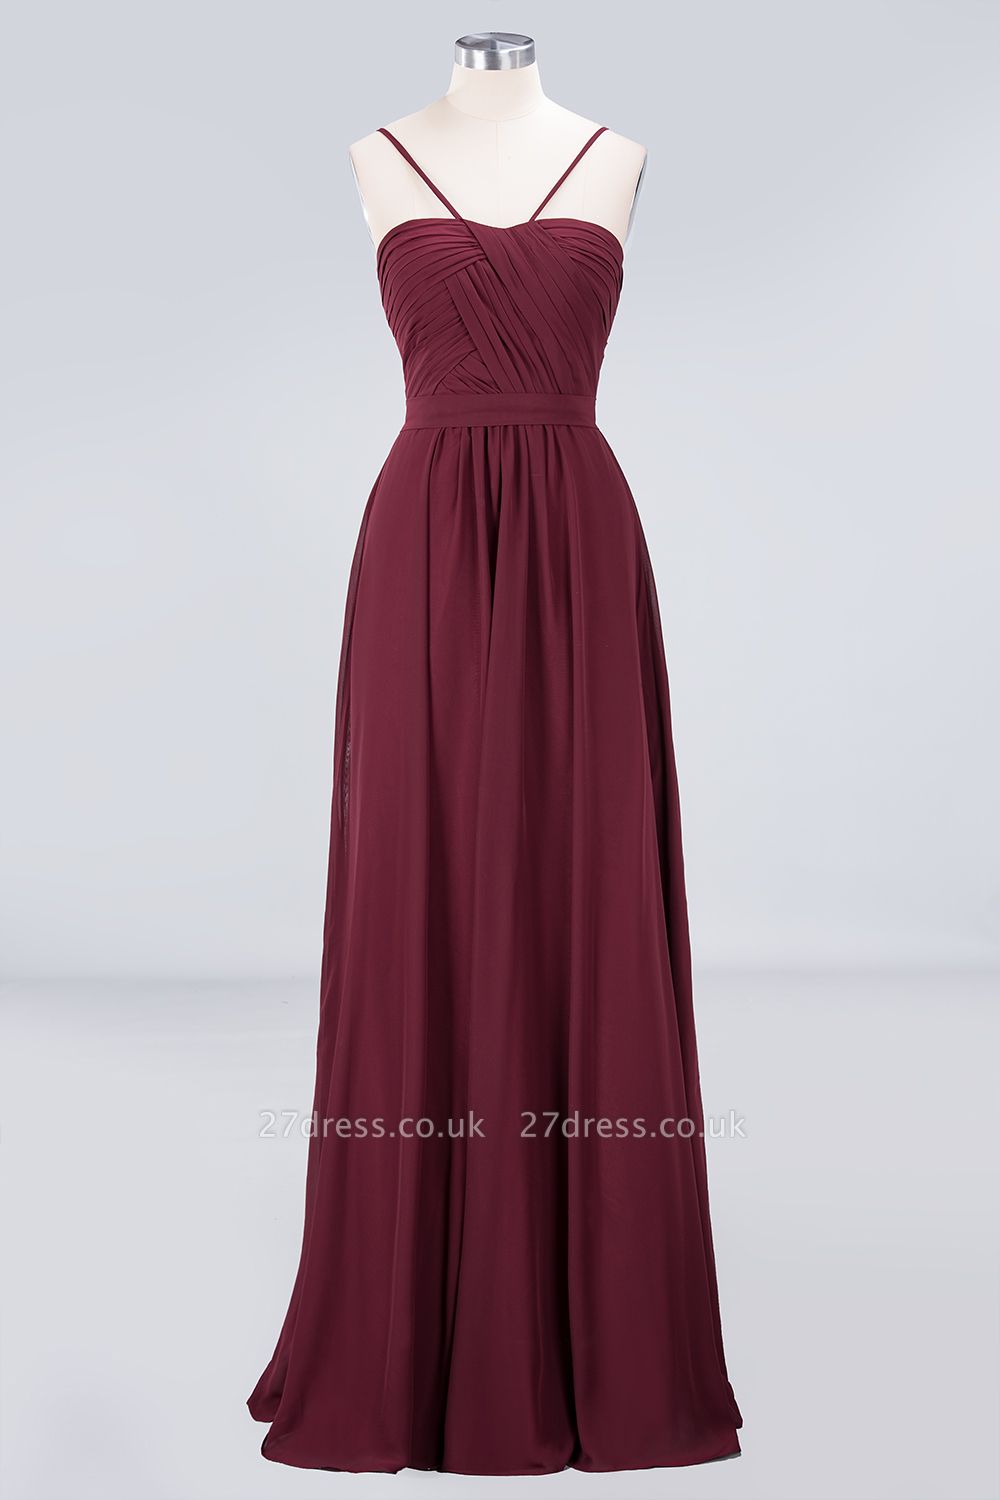 Sexy A-line Flowy Sweetheart Spaghetti-Straps Backless Floor-Length Bridesmaid Dress UK UK with Ruffles